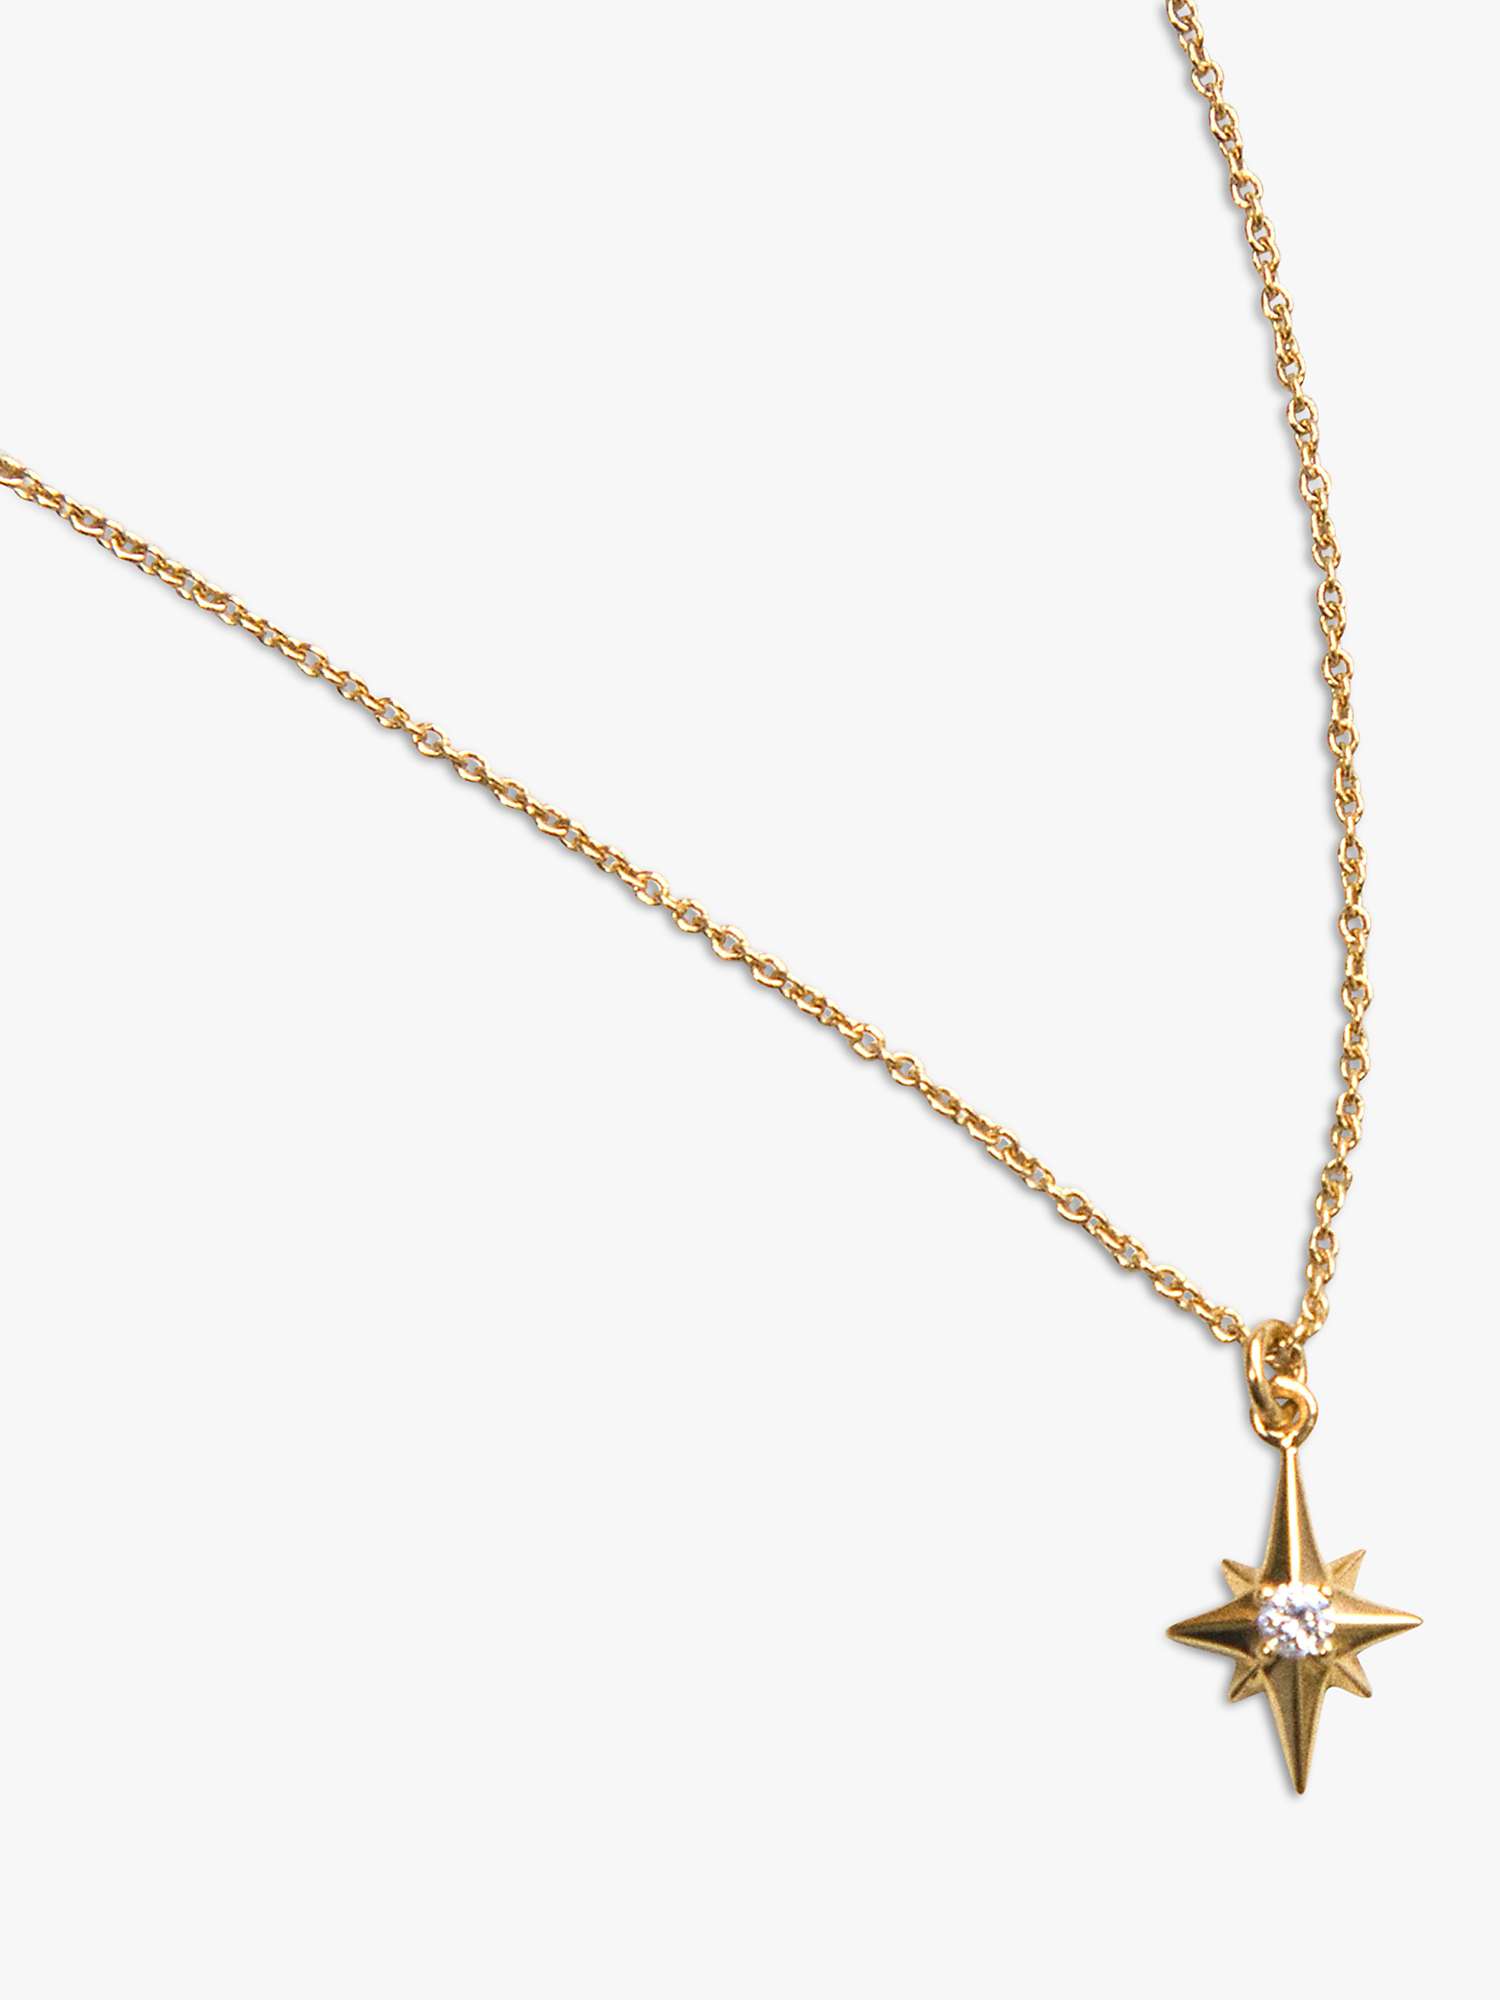 Buy Edge of Ember 14ct Gold Diamond North Star Pendant Necklace Online at johnlewis.com